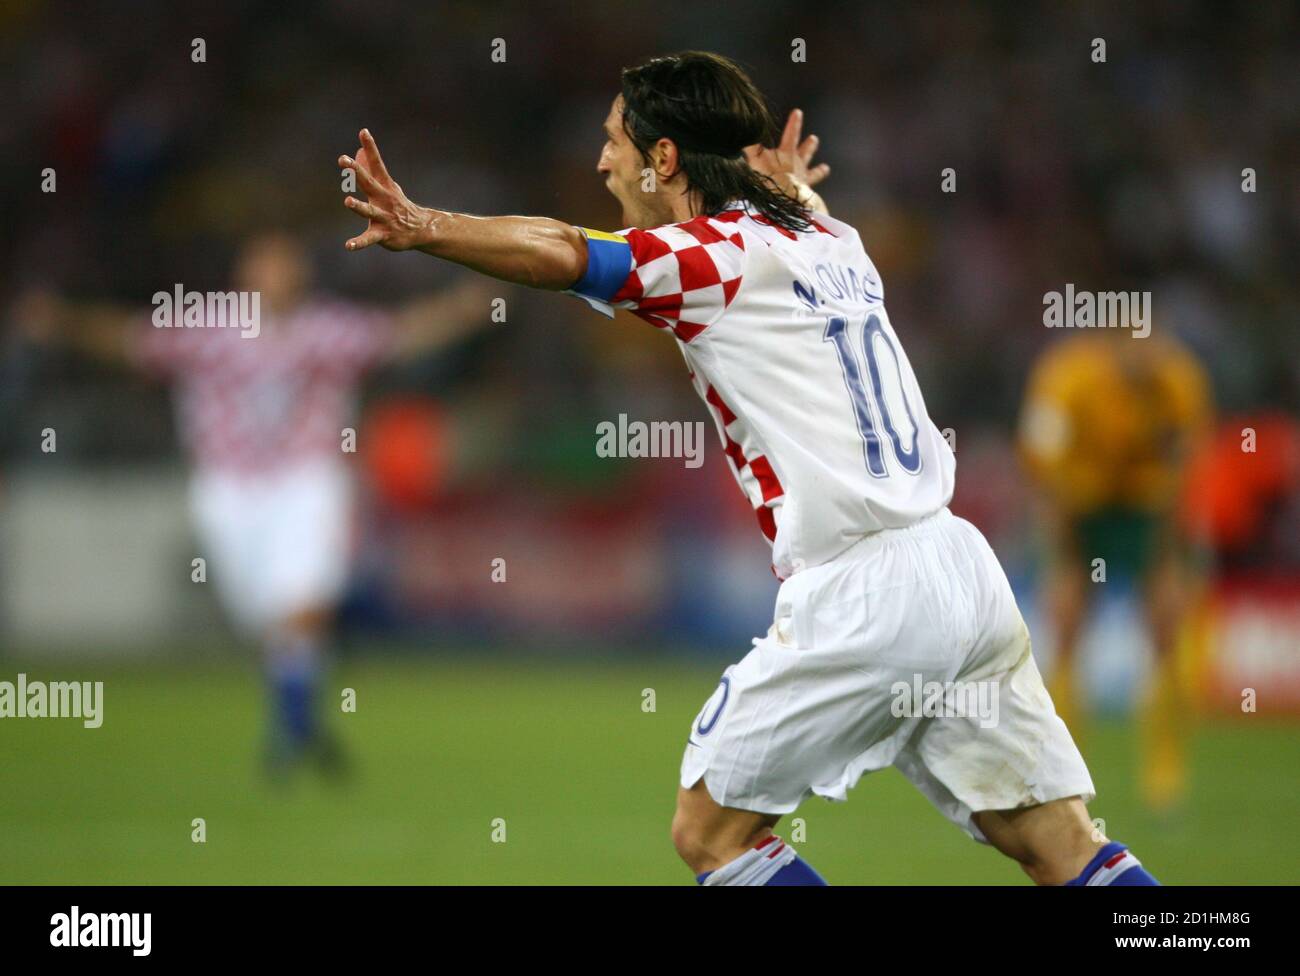 Croatia's Niko Kovac celebrates his goal against Australia during their  Group F World Cup 2006 soccer match in Stuttgart June 22, 2006. FIFA  RESTRICTION - NO MOBILE USE REUTERS/Kai Pfaffenbach (GERMANY Stock Photo -  Alamy